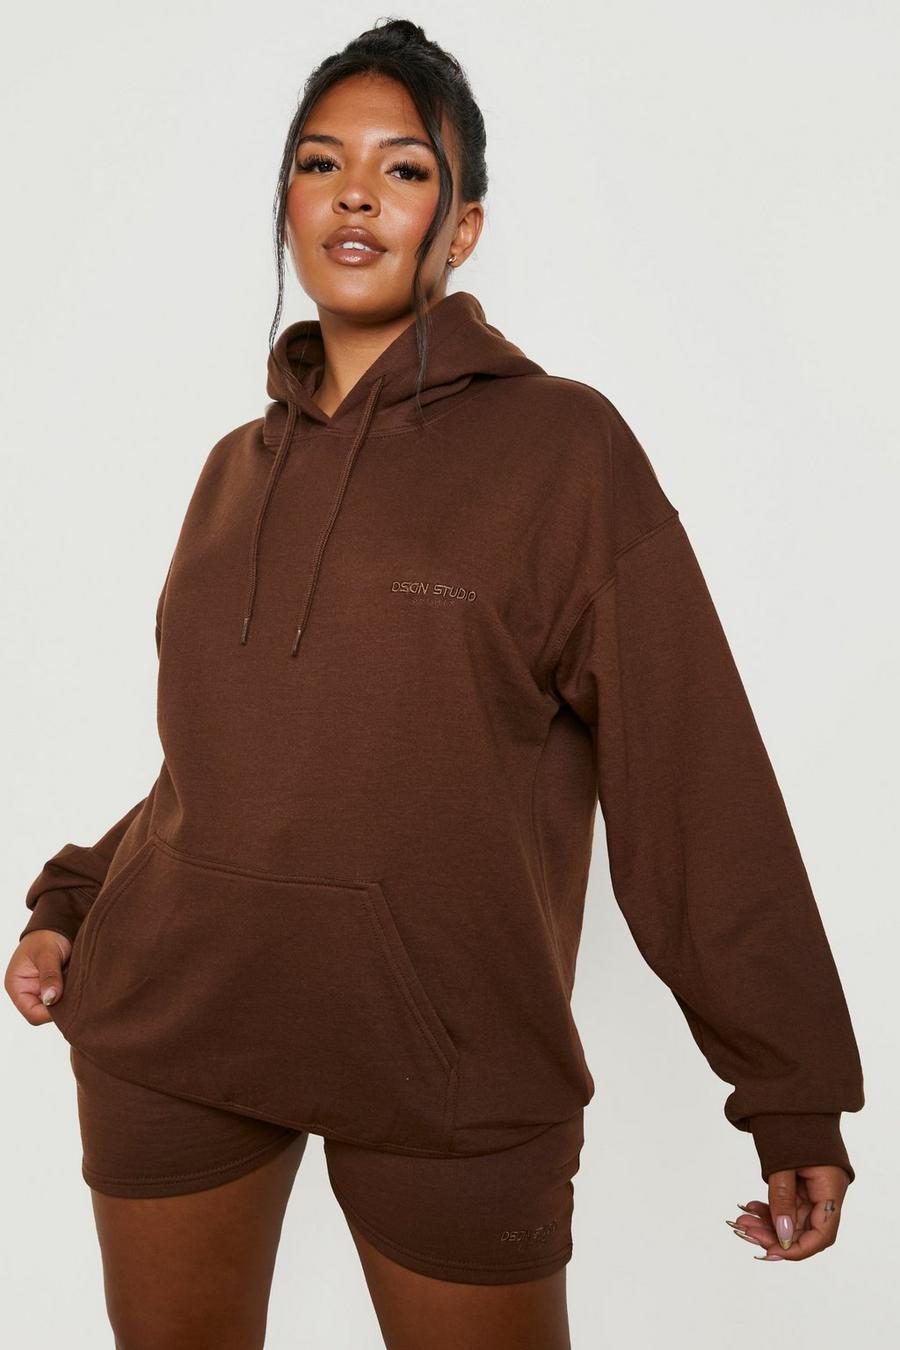 Chocolate brun Plus Dsgn Studio Hoodie and Shorts Tracksuit